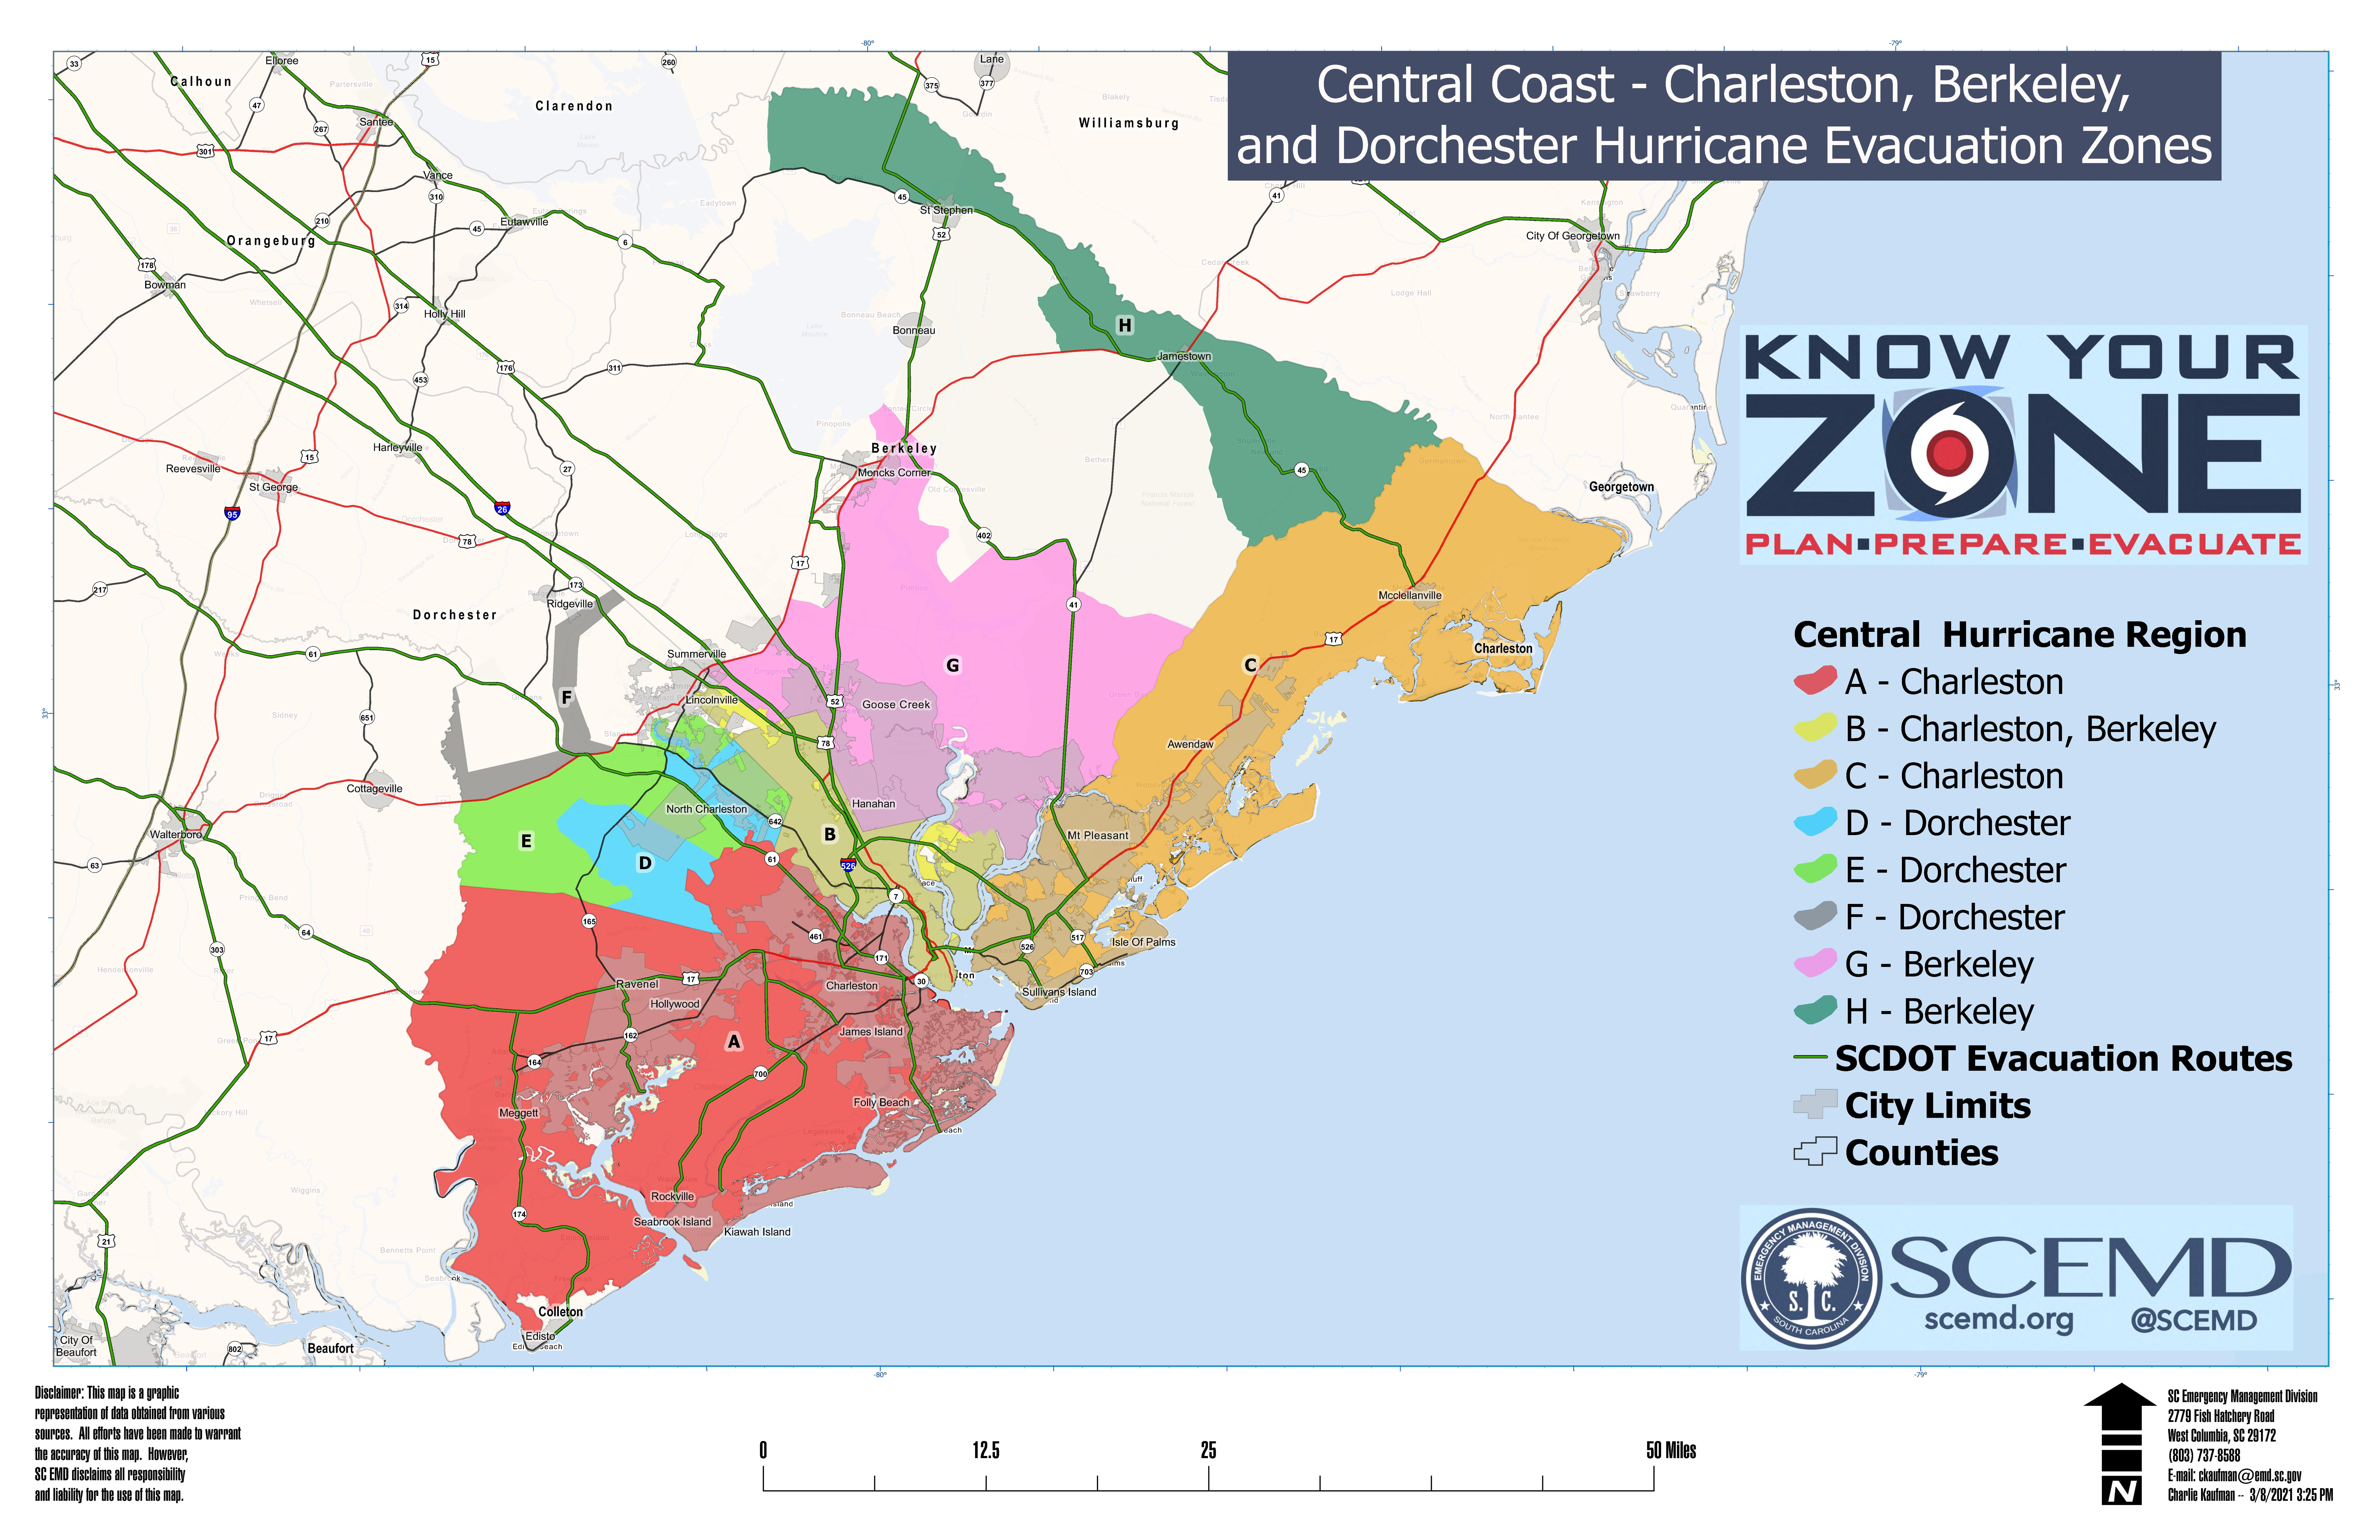 Know Your Zone Evacuation Map (Link)